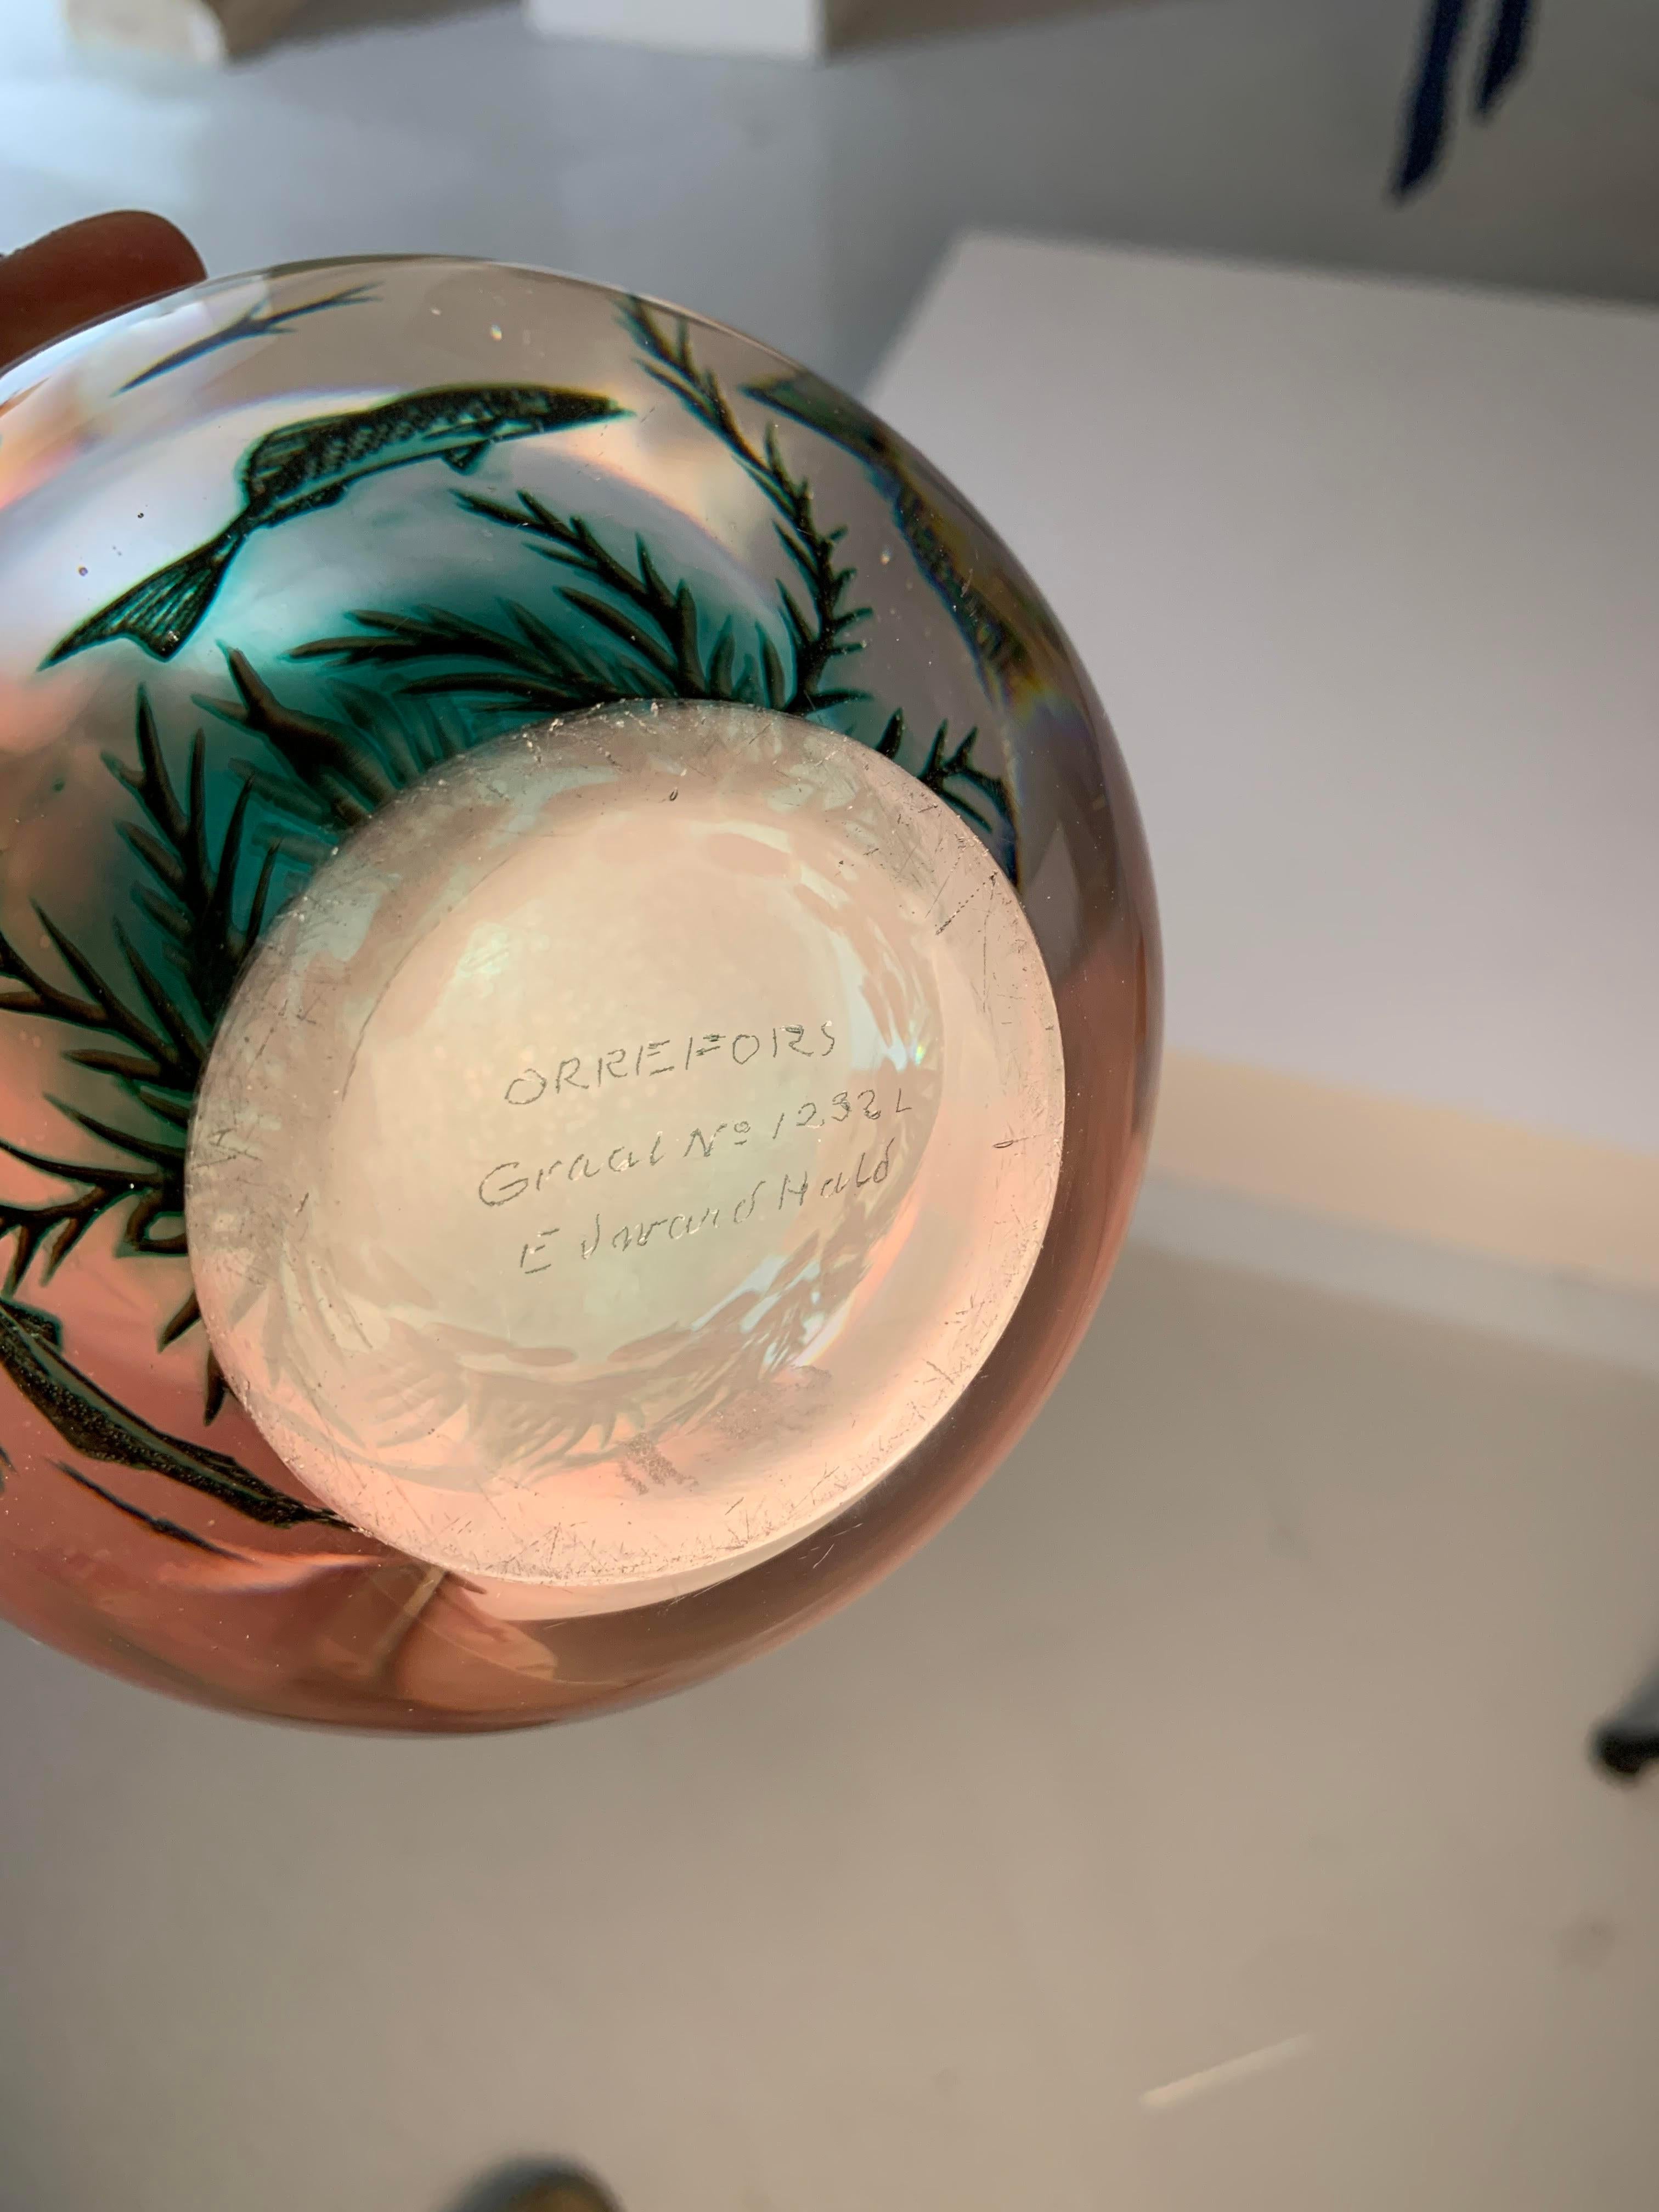 he Swedish Fiskgraal Aquamarine Vase by Edward Hald for Orrefors, dating back to the 1950s, stands as a truly unique piece of artistry and craftsmanship. Its distinctiveness lies in the delicate balance between its exquisite design and the